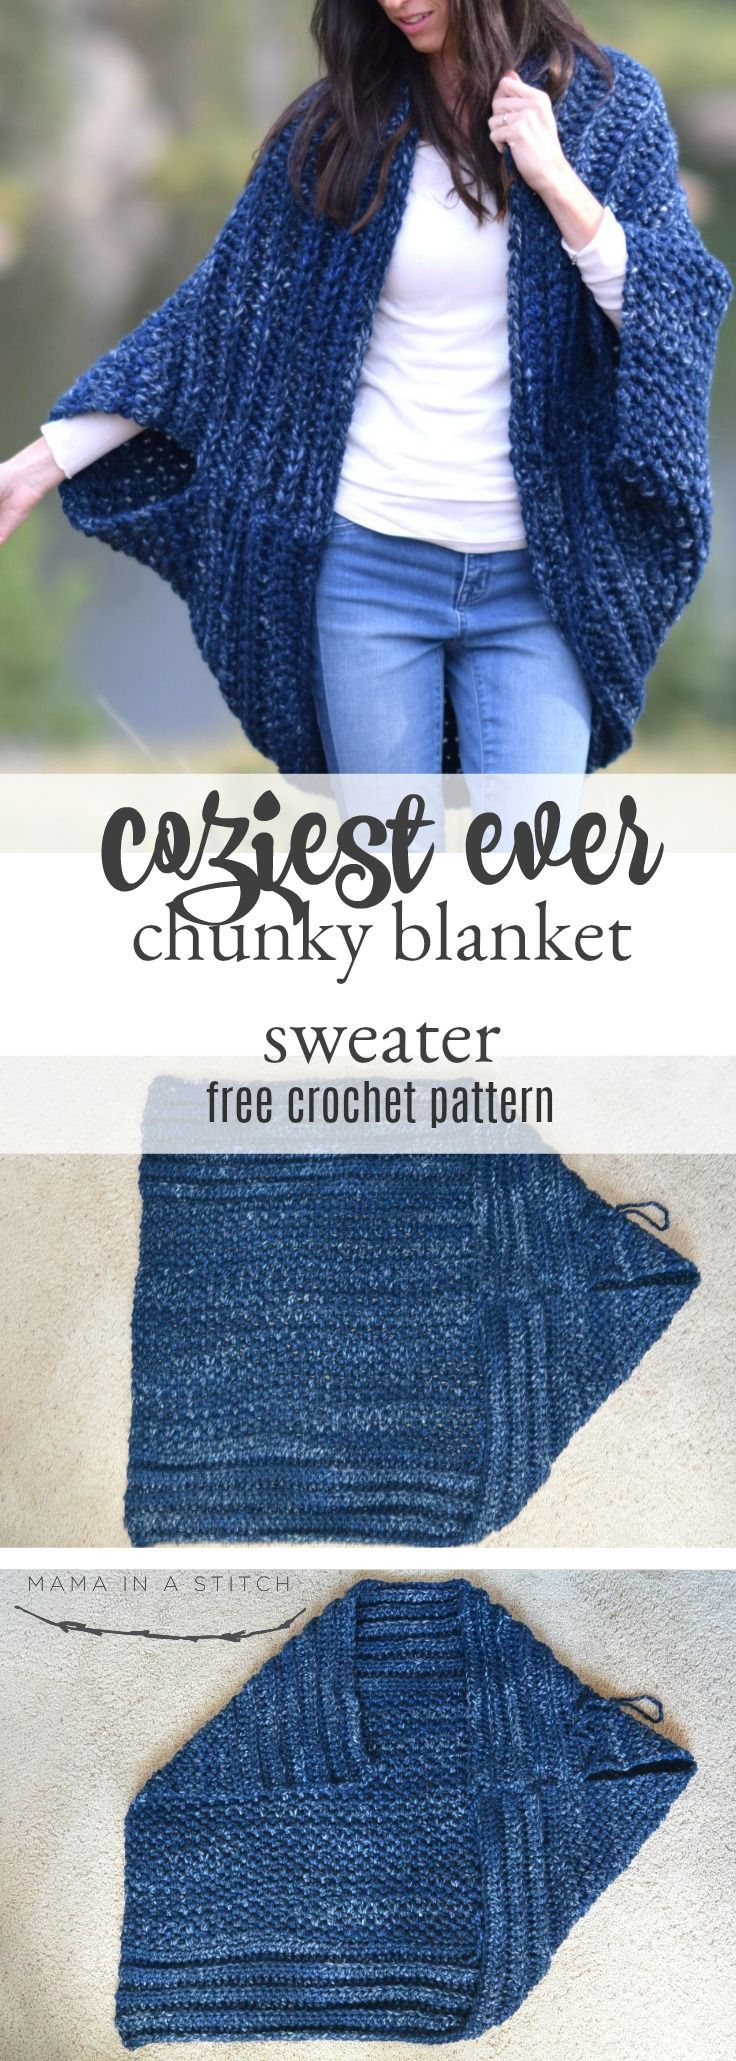 Oh my – I am SO excited to share this new crocheted blanket cardigan with you to